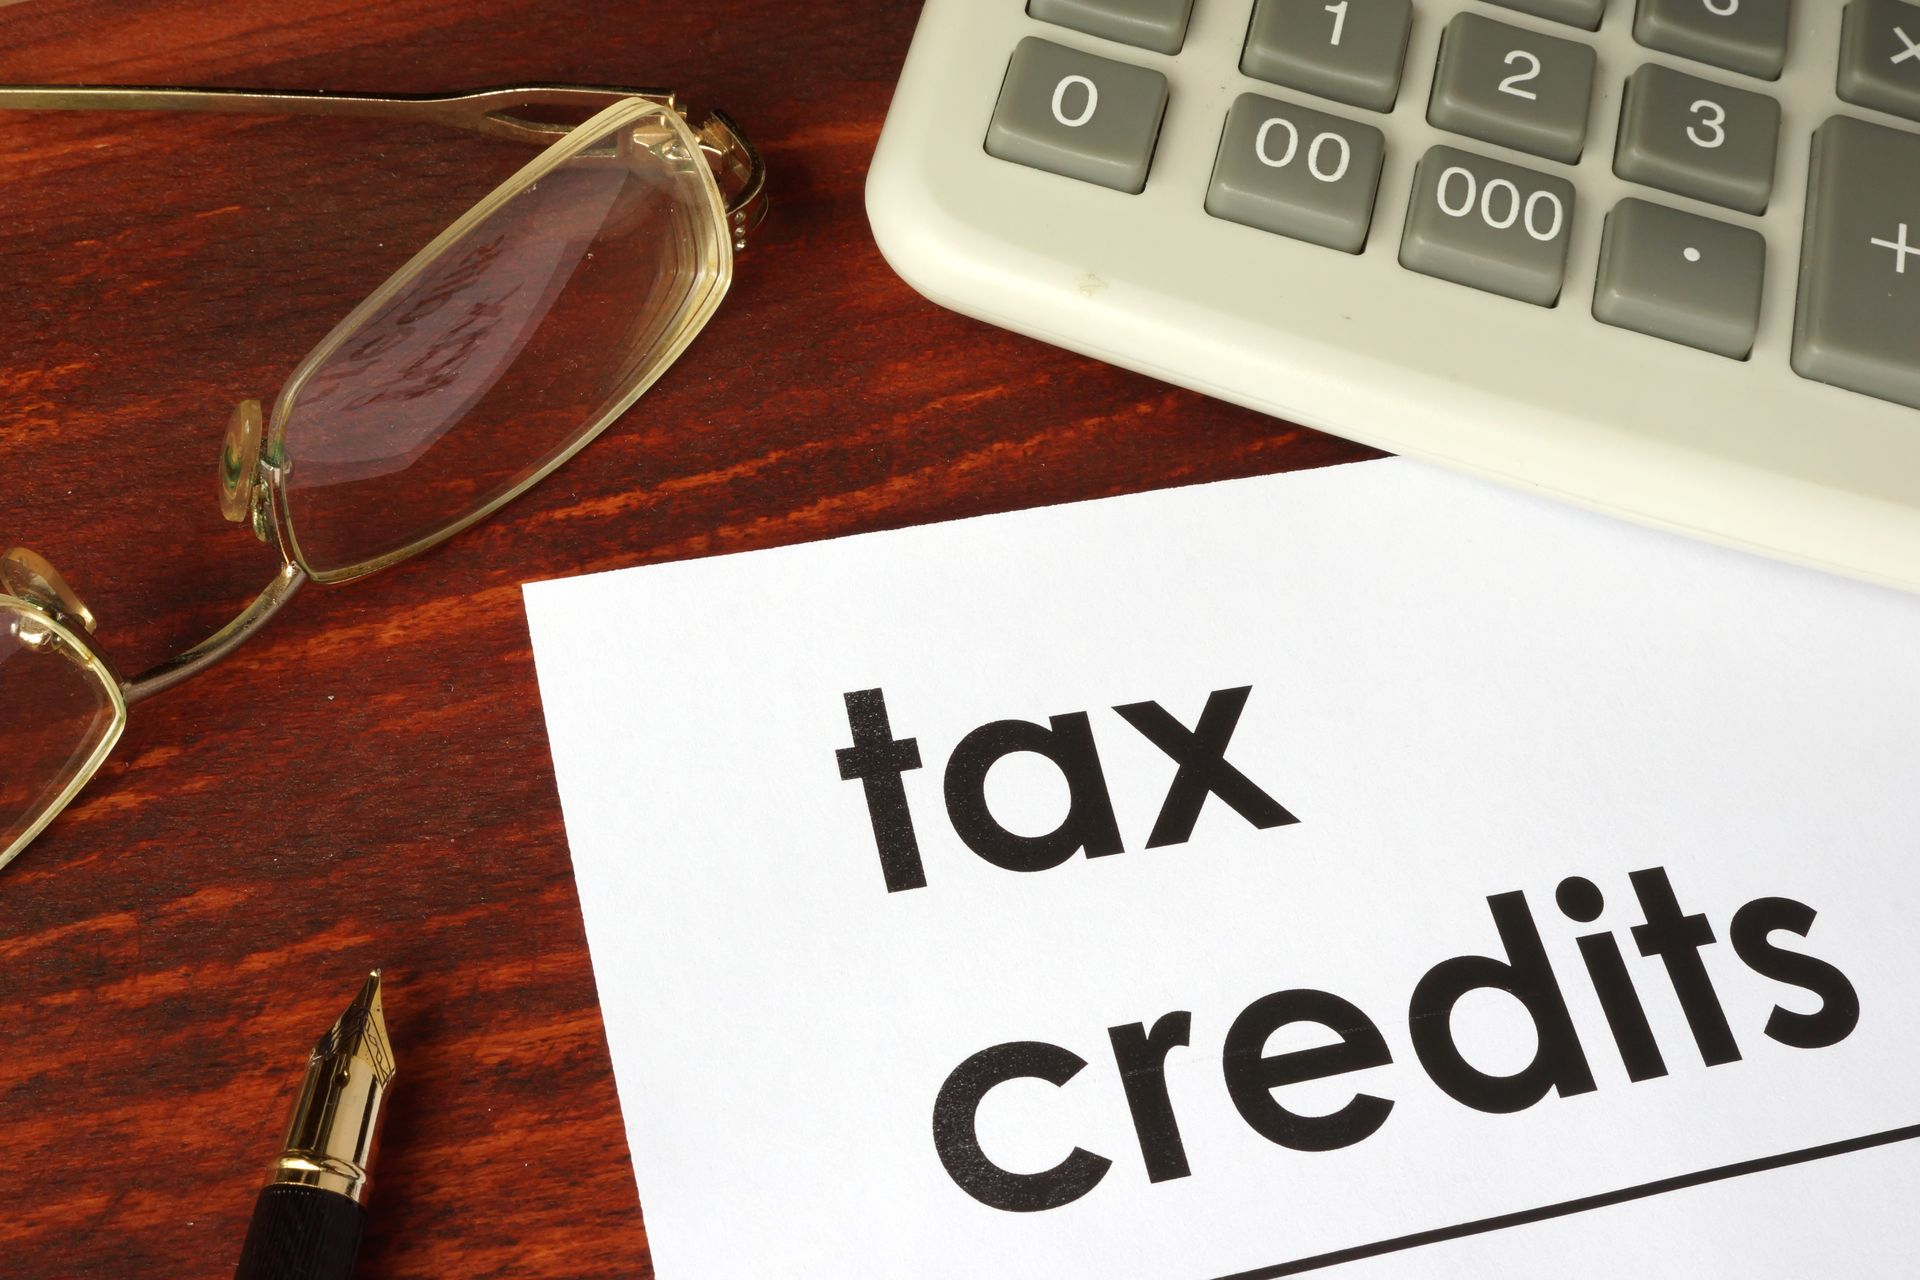 45L tax credit is a tax incentive designed to promote greater energy efficiency